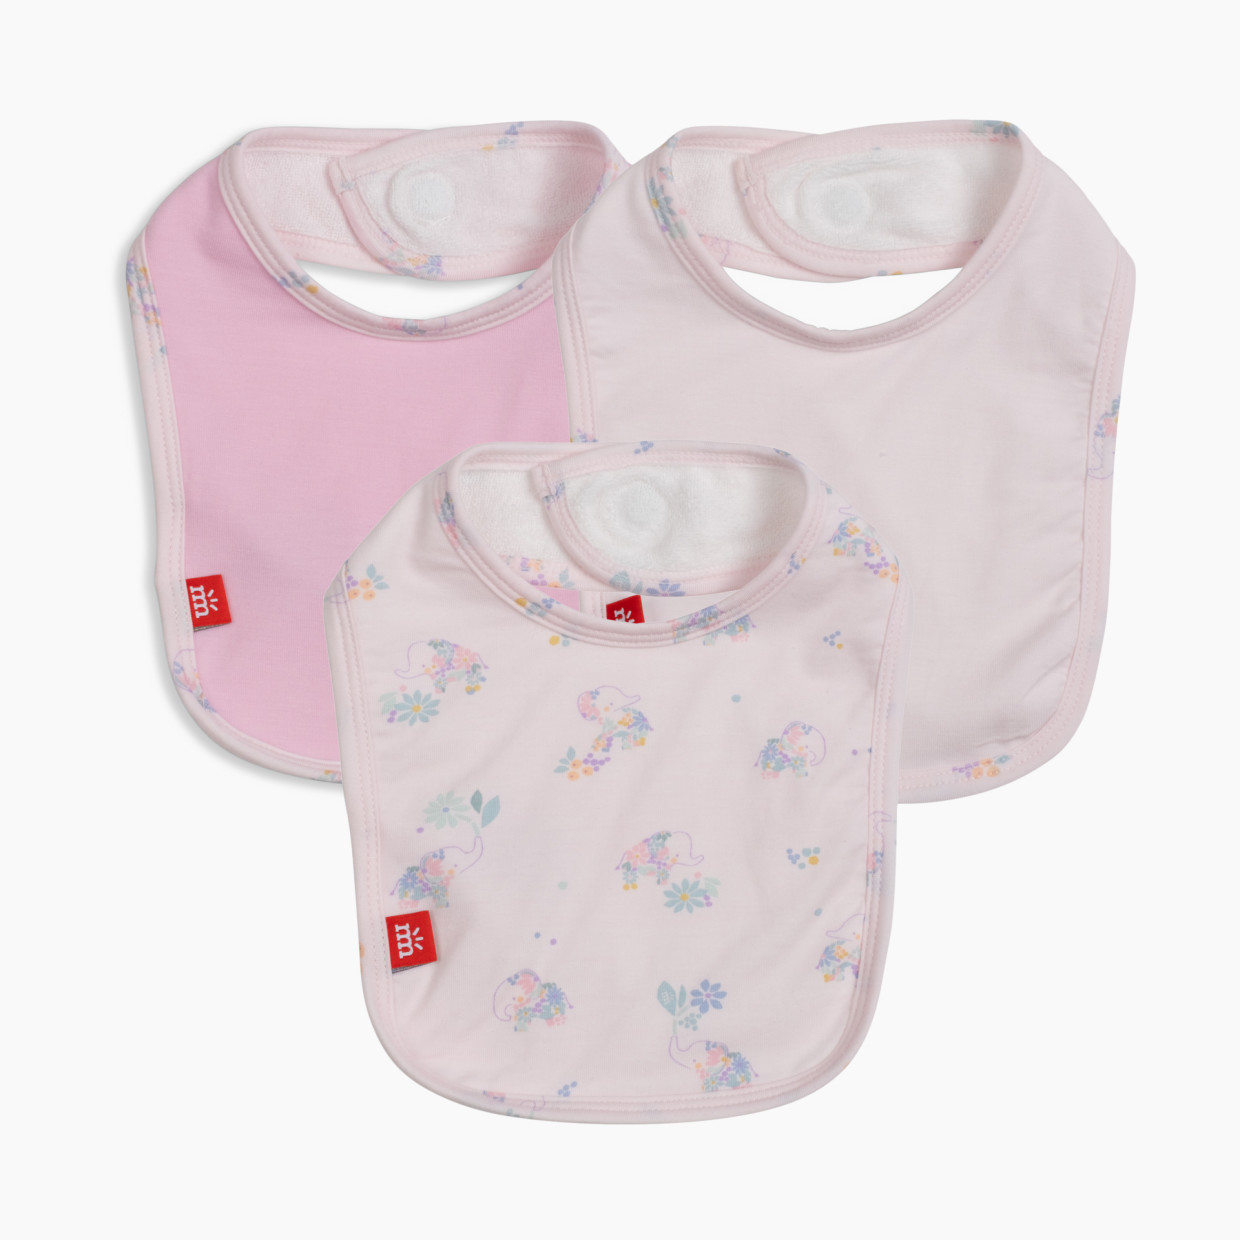 Magnetic Me Modal 3 Pack Bibs - Forget Me Not, One Size.